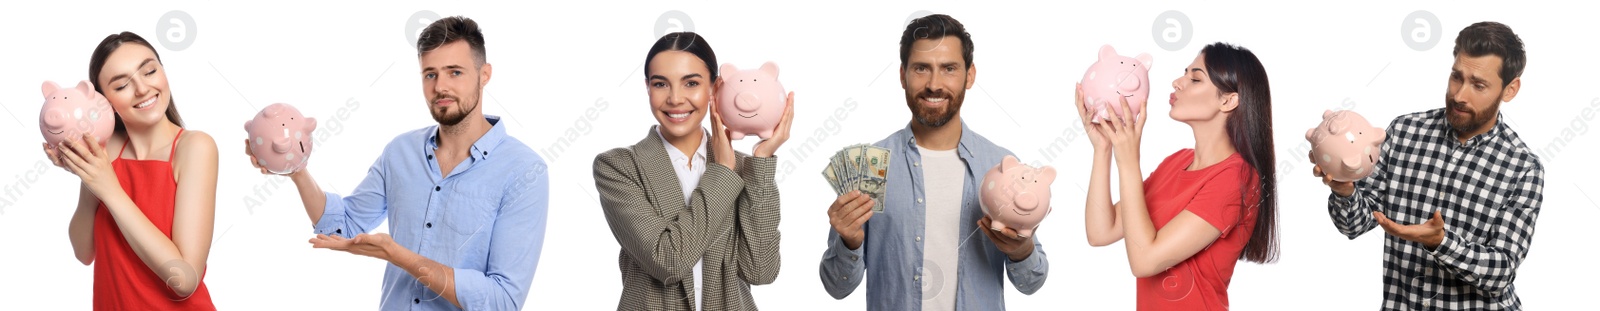 Image of Collage with photos of people holding ceramic piggy banks on white background. Banner design